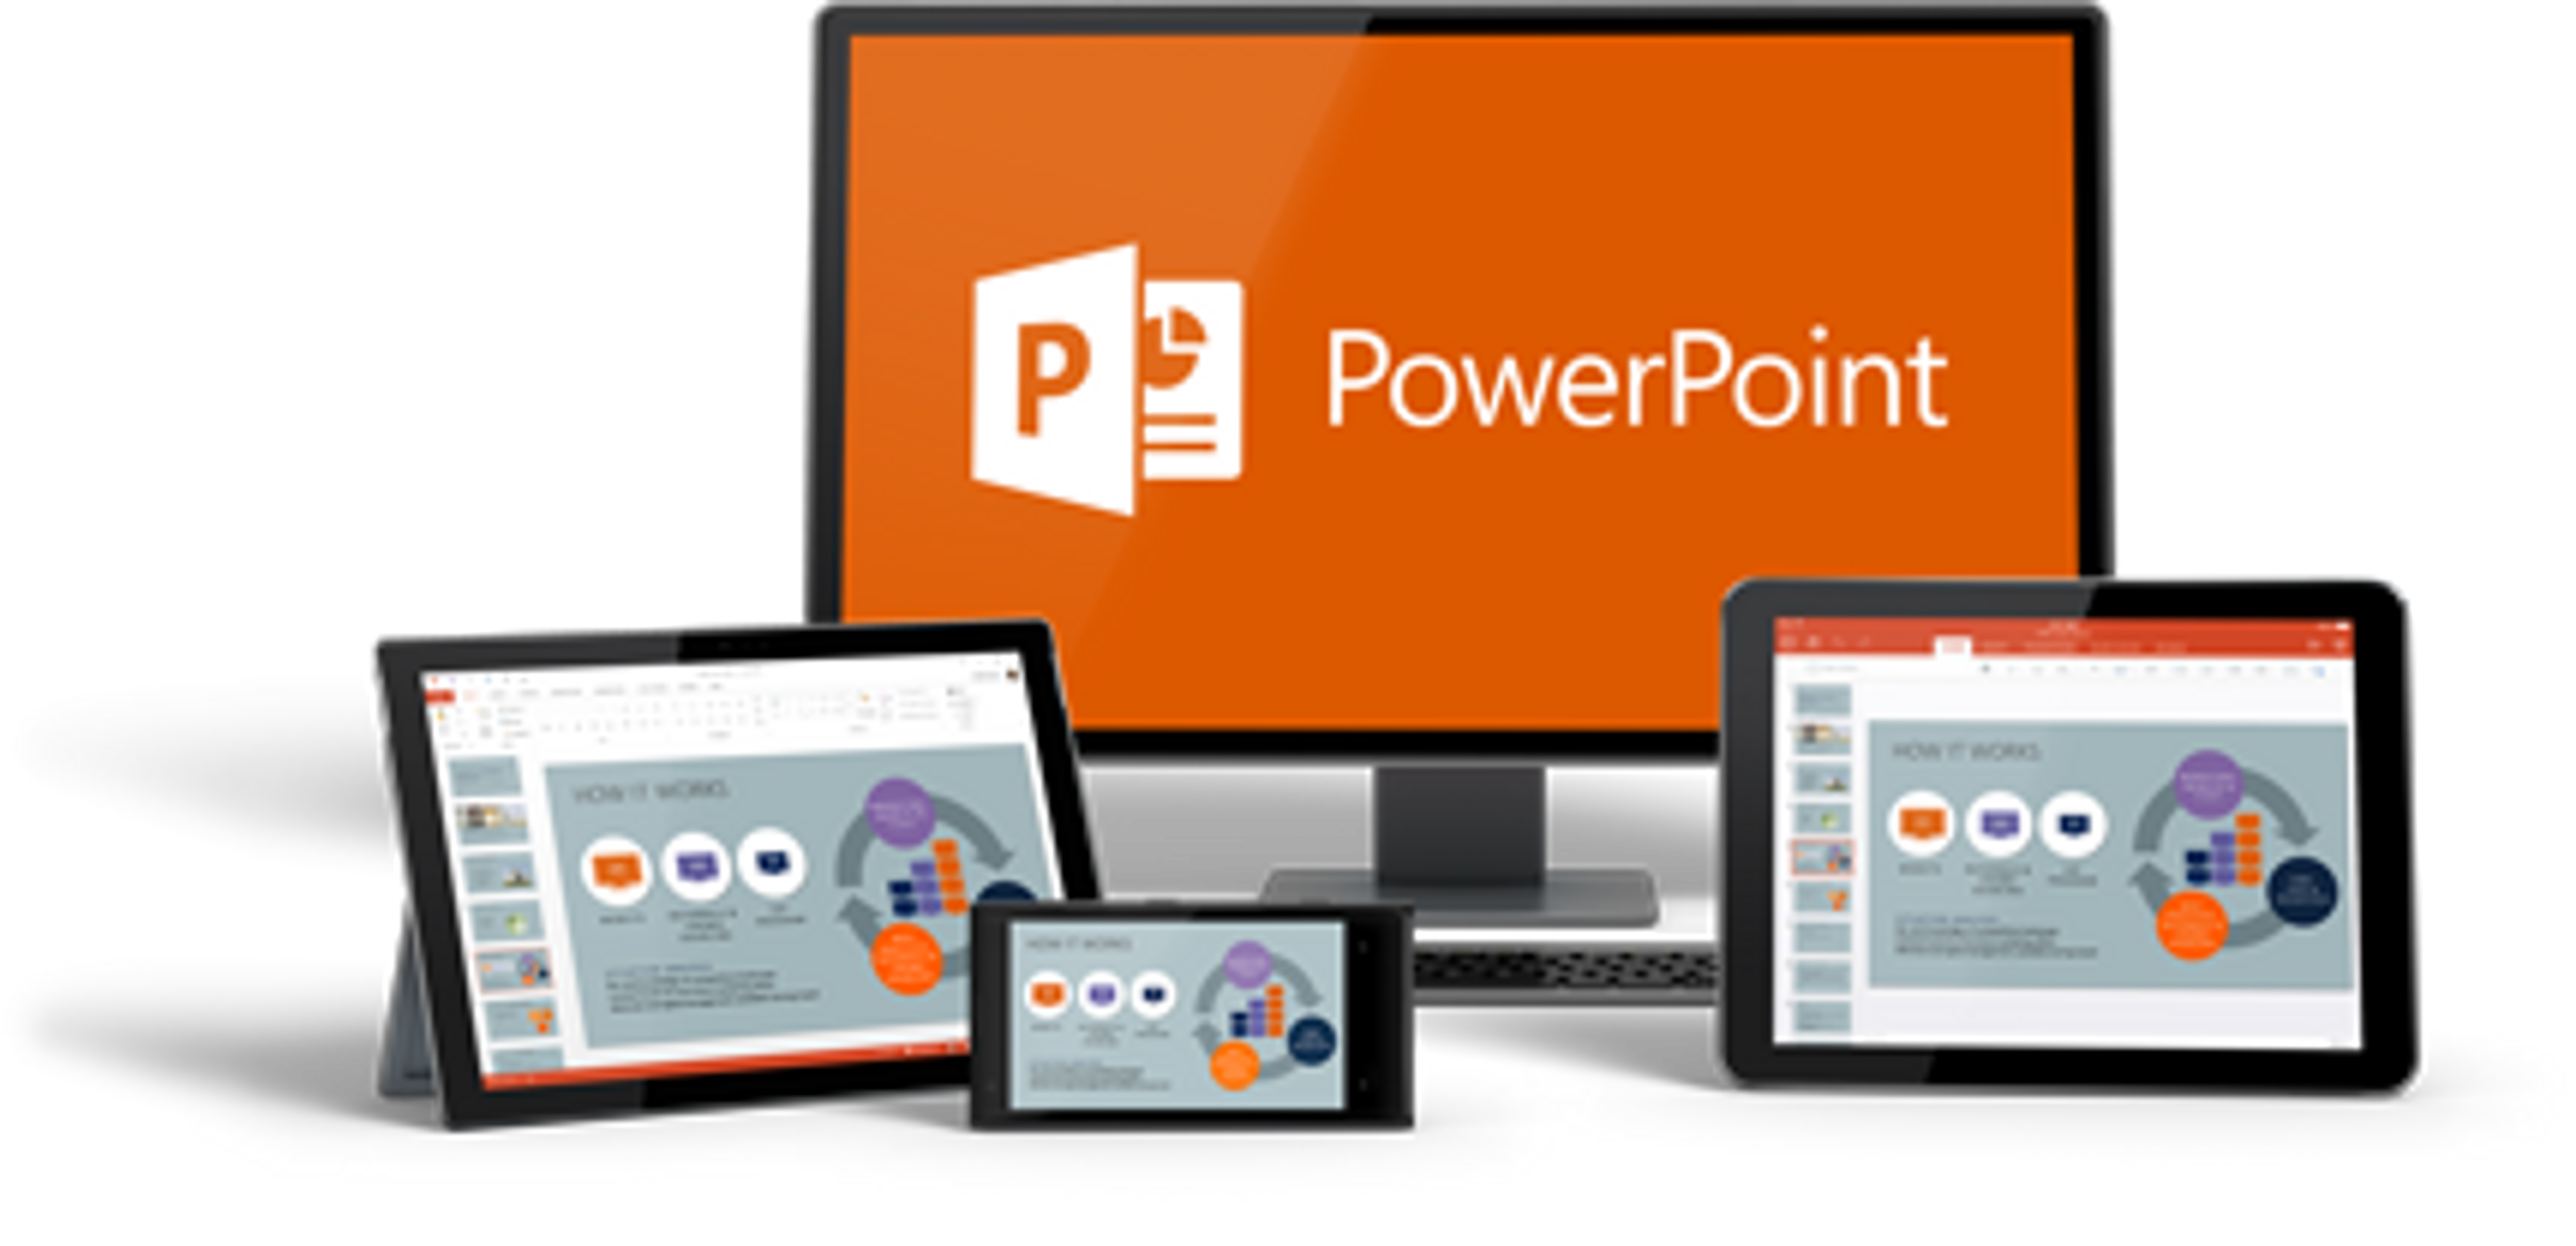 How to Cite Pictures in PowerPoint? - Superside